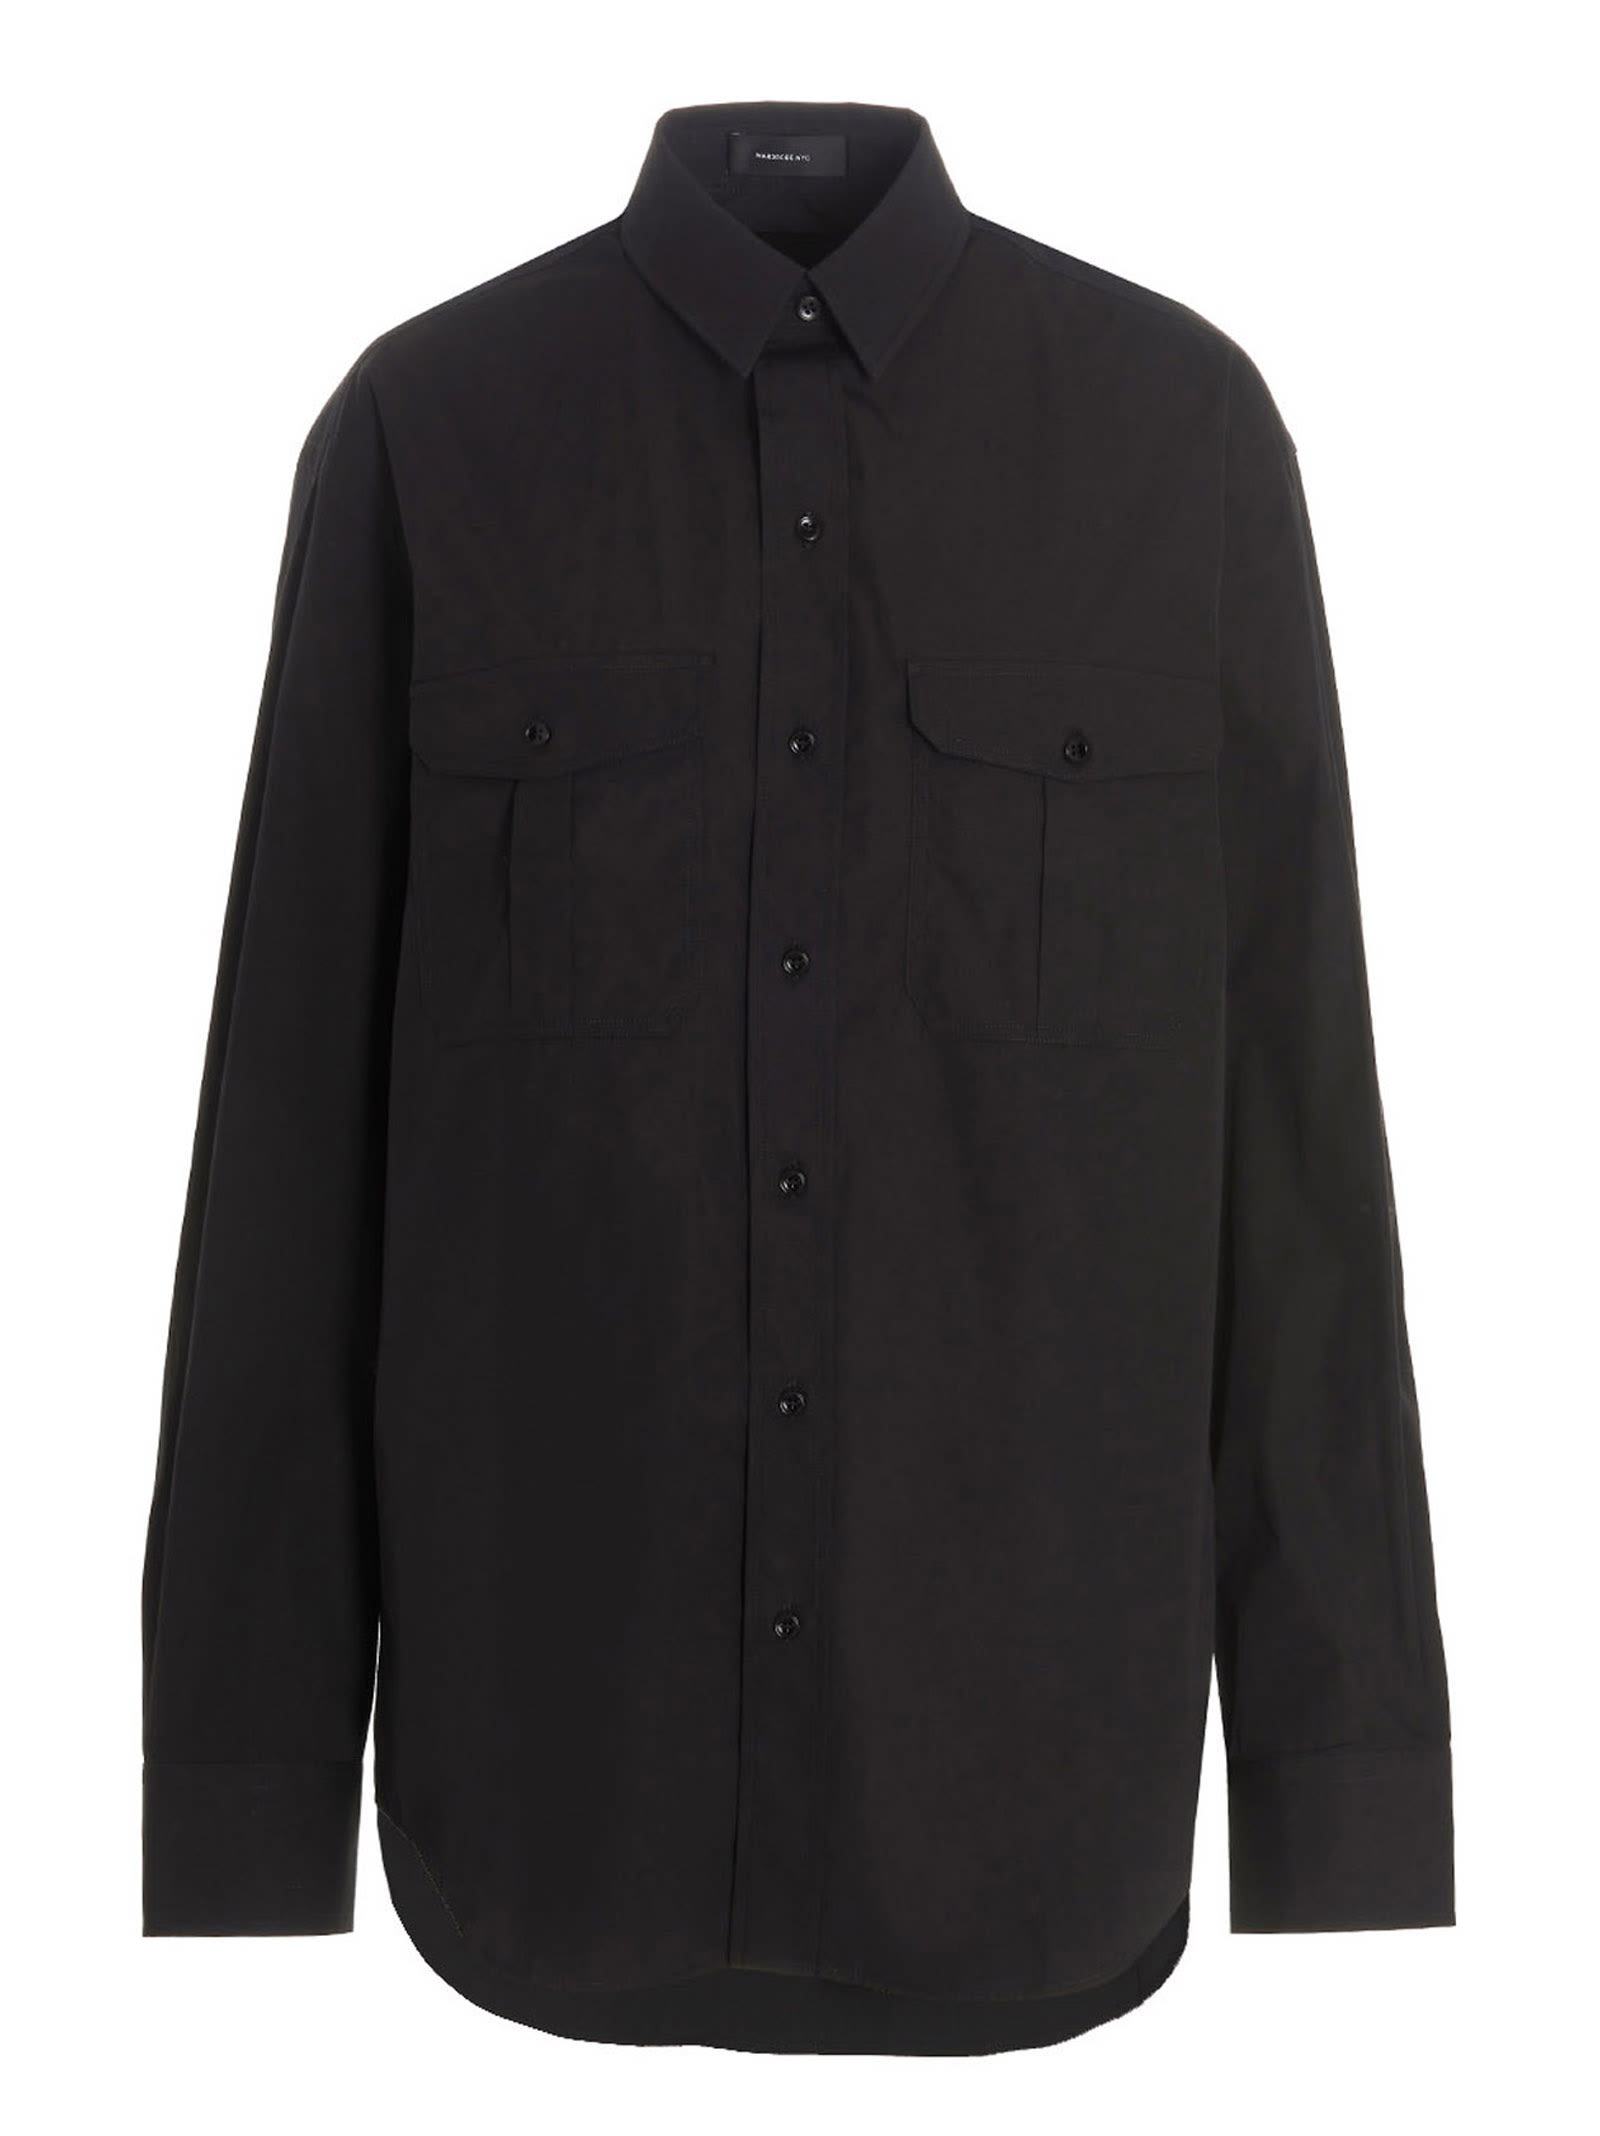 WARDdressing gown.NYC OVERSIZE SHIRT